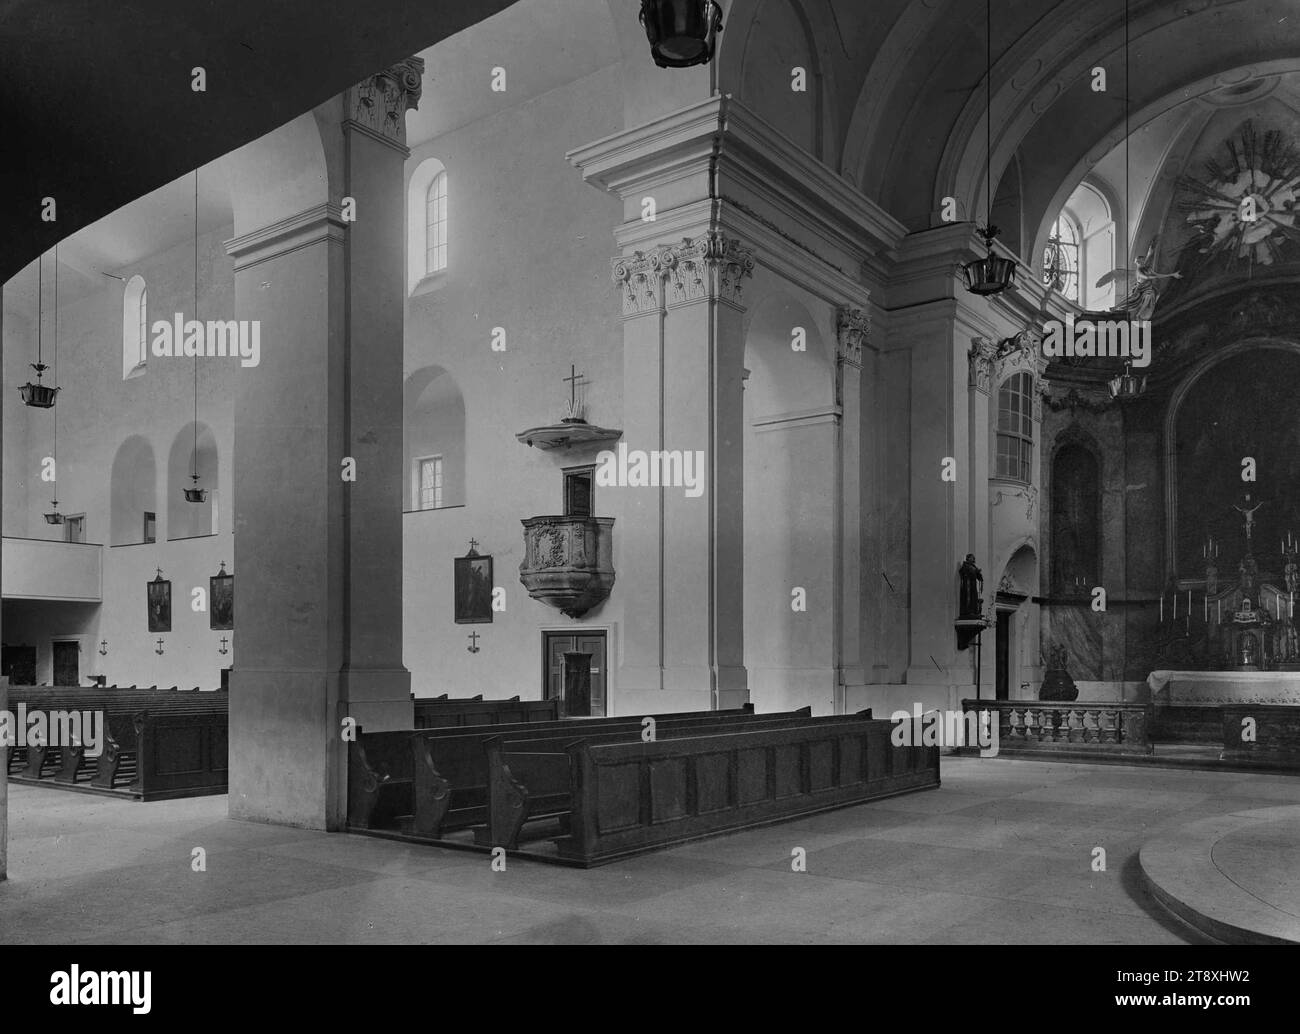 Parish Church of St. Gertrud (18th, Währinger Straße 95), interior view, Martin Gerlach jun. (1879-1944), photographer, Karl Holey (1879-1955), architect, dated c. 1934-1936, glass, negative, height 17.8 cm, width 23.8 cm, architecture, 18th district: Währing, interior of a church, Währinger Parish Church of St. Gertrud, interior  depiction of a building, The Vienna Collection Stock Photo